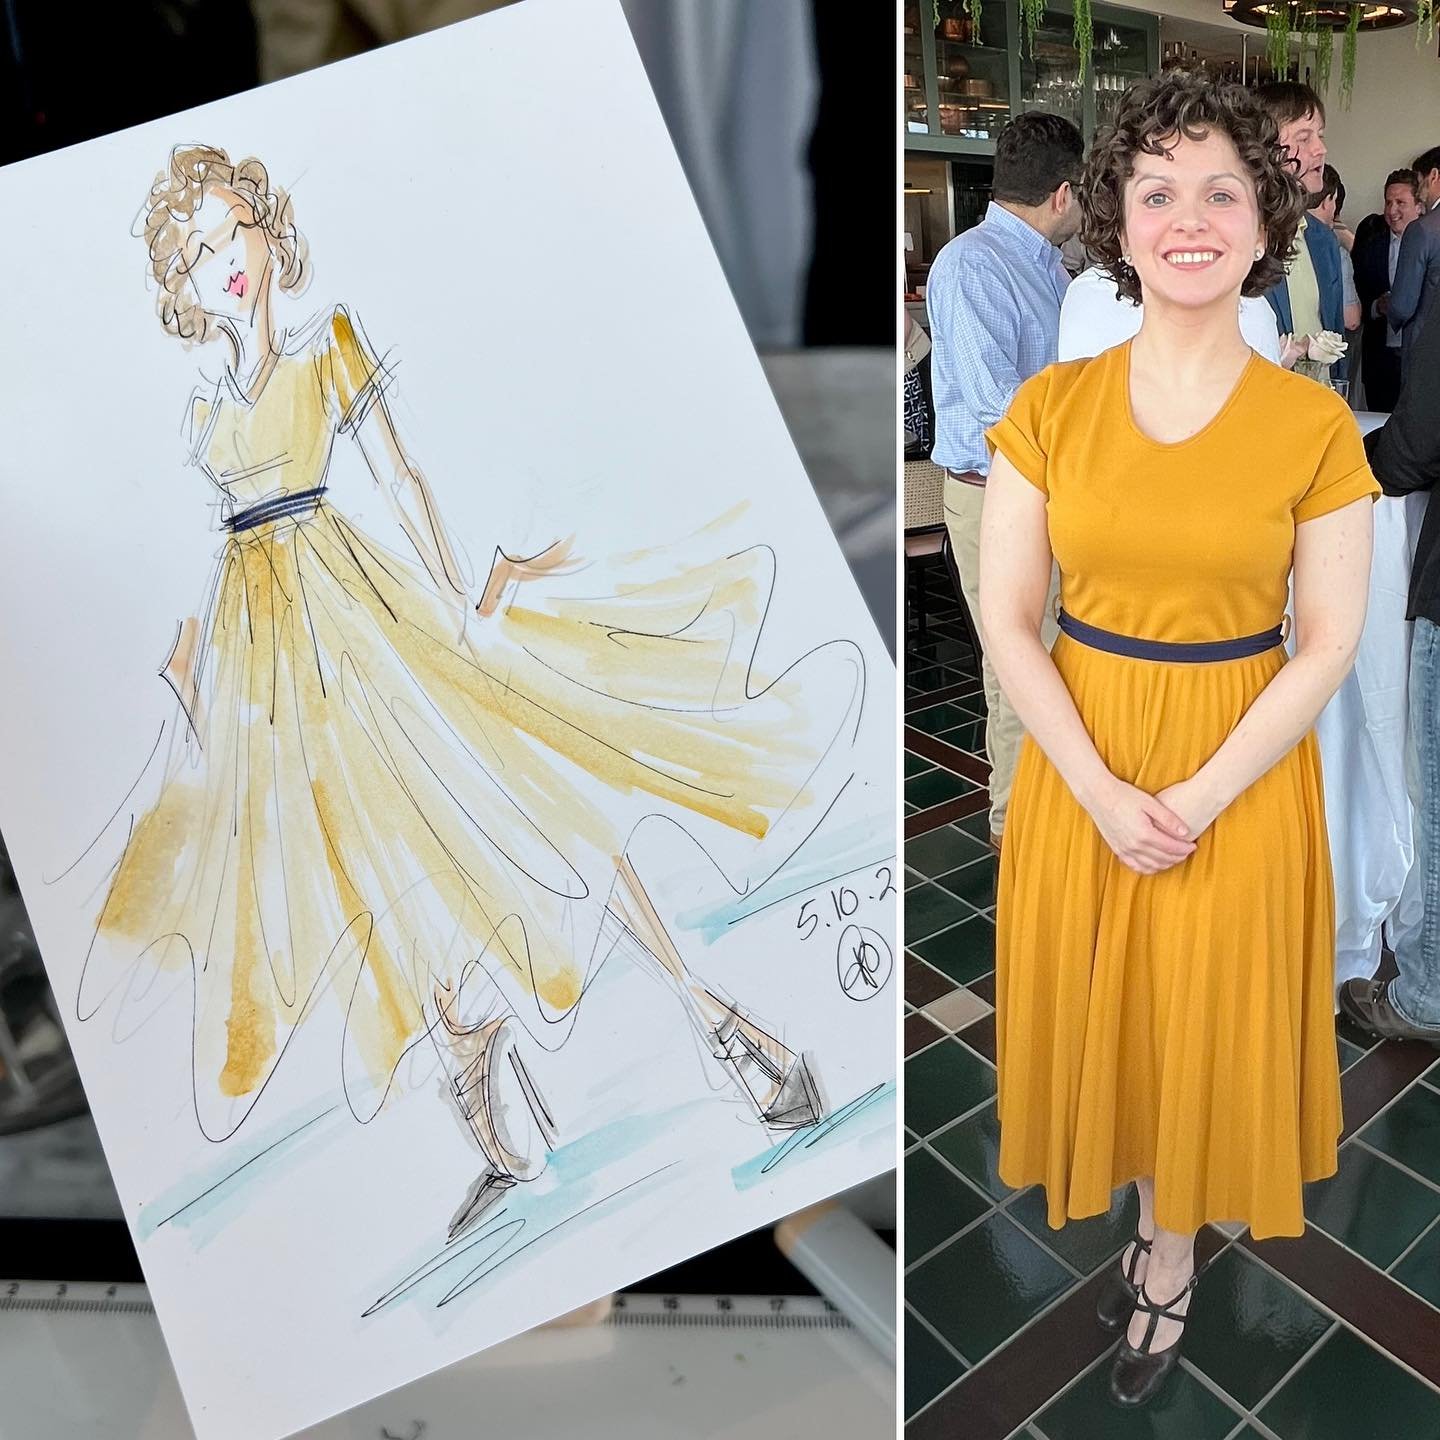 Live sketches are perfect for your next corporate event, like this Company Founder&rsquo;s Day Party! 🎨🎉
.
.
#liveillustration #corporateevents #companyparty #liveguestillustration #livepainting #liveguestportraits #turnmeintoafashionsketch #fashio